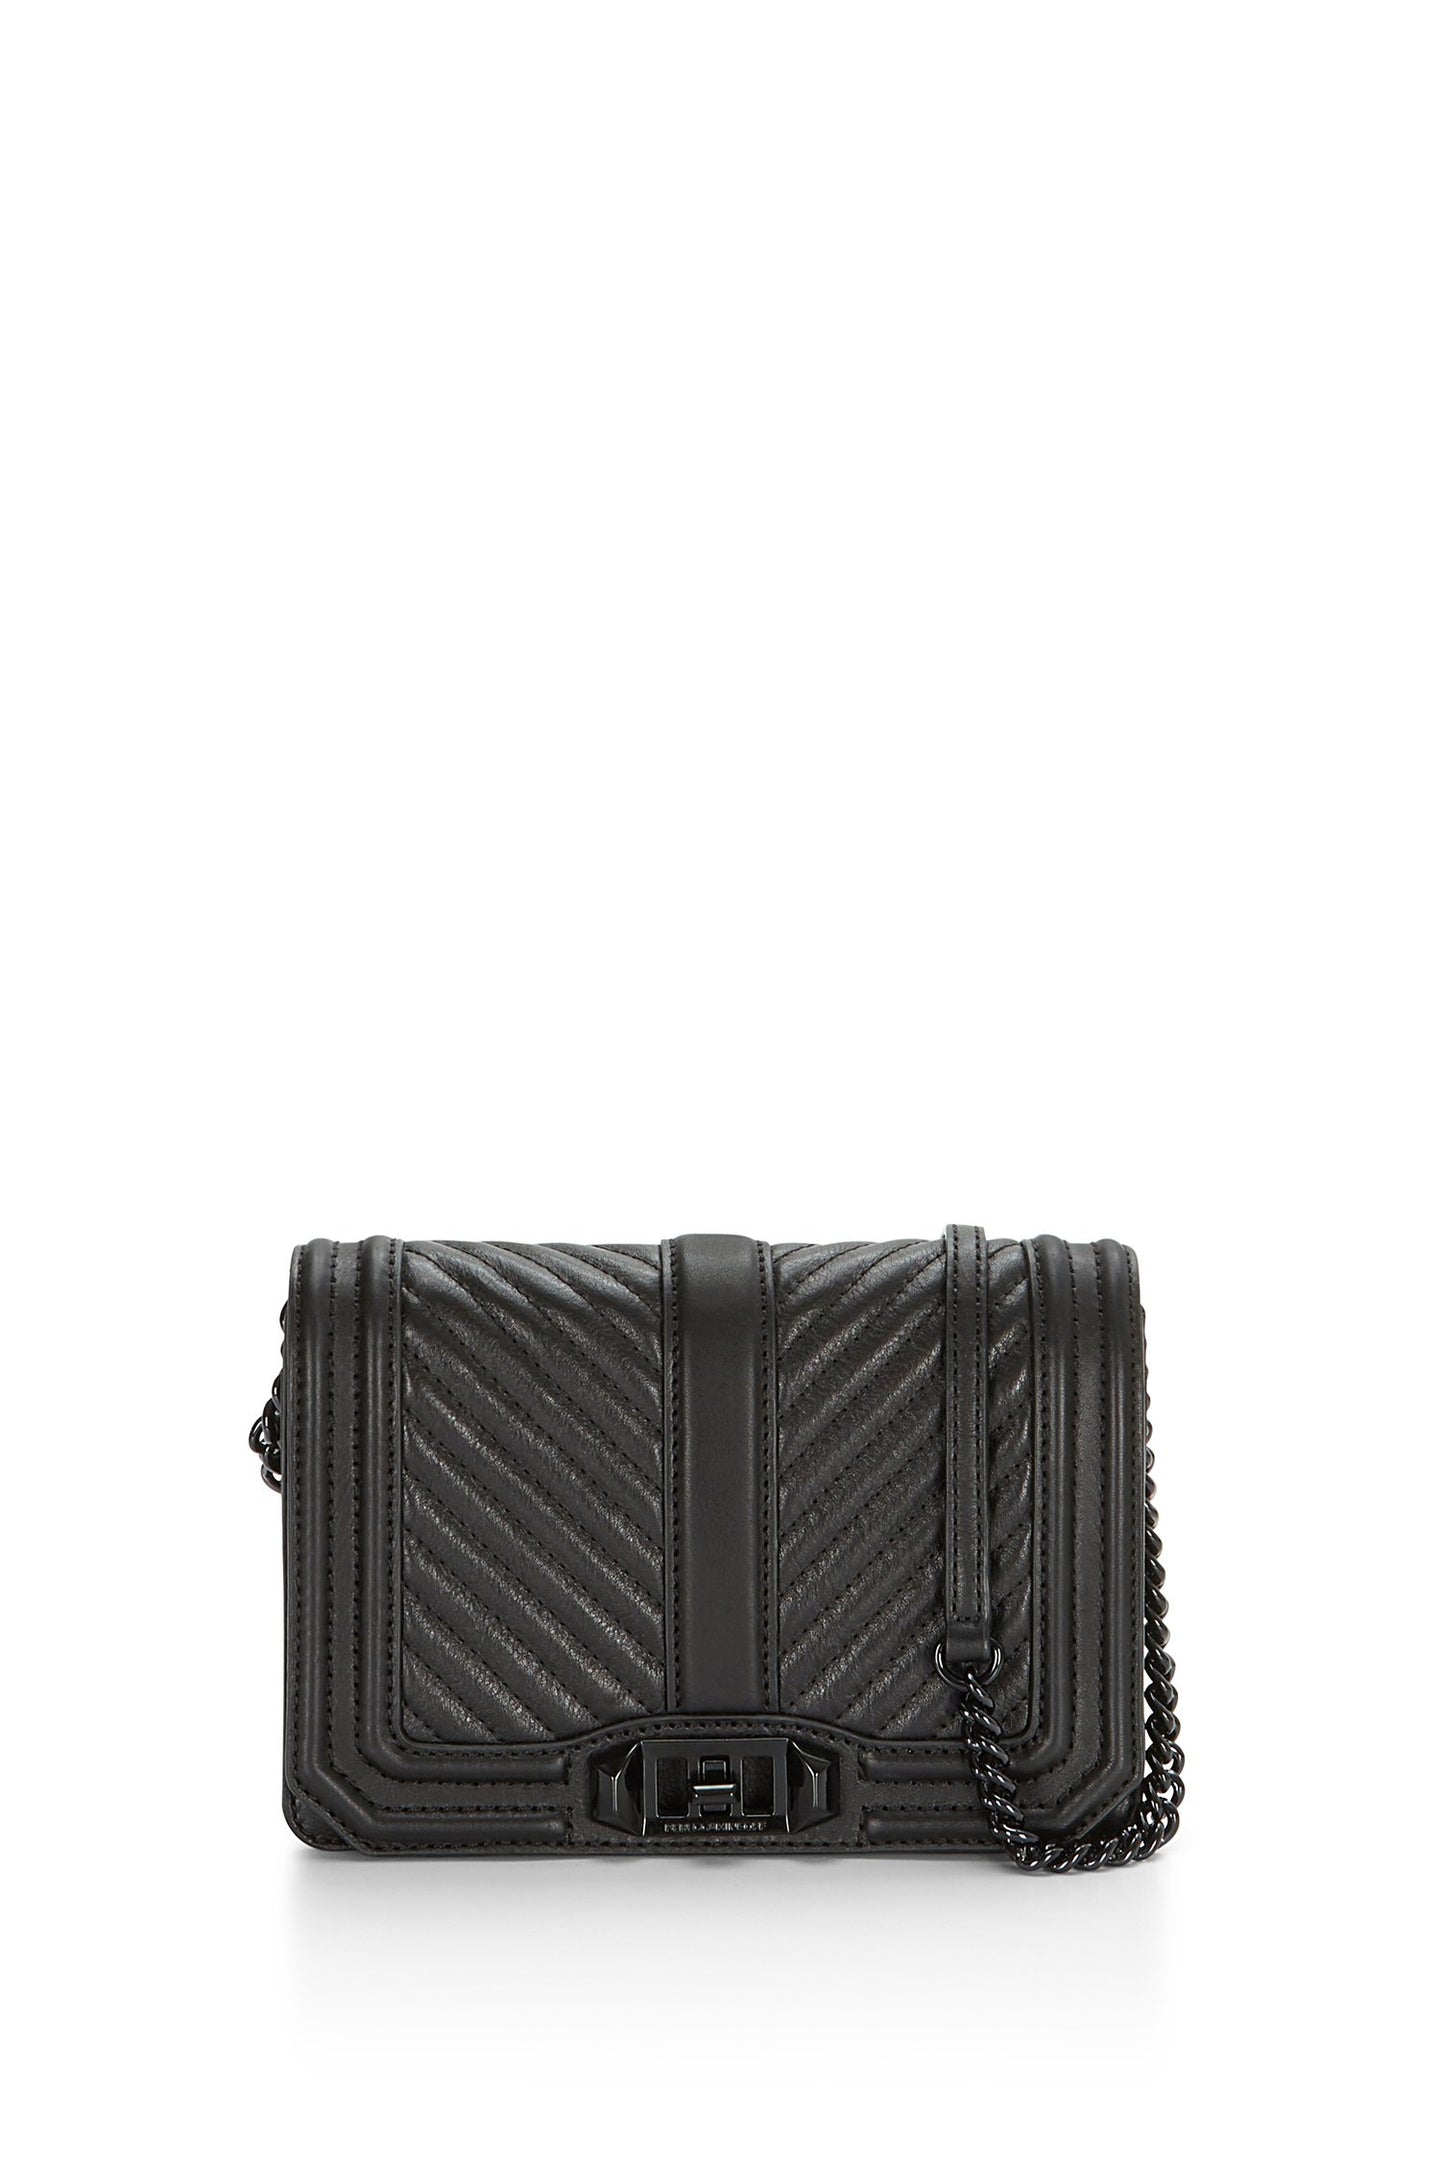 CHEVRON QUILTED SMALL LOVE CROSSBODY